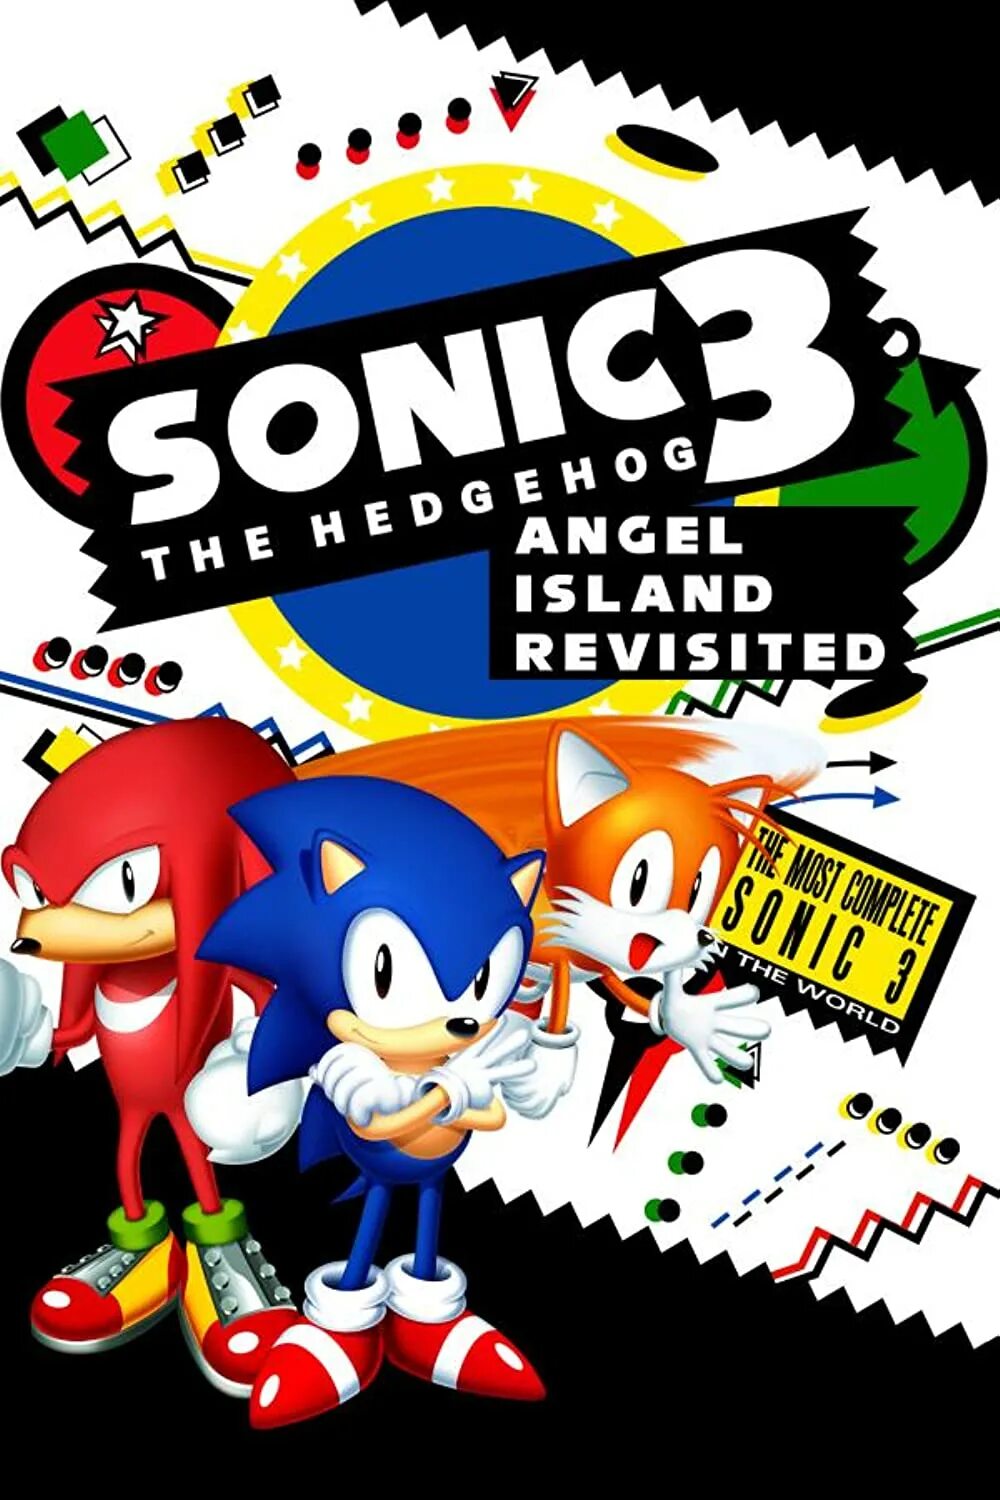 Sonic and knuckles download. Игра Sonic the Hedgehog 3. Sonic 3 Air. Sonic 3 Air logo. Angel Island! (Sonic 3 and Knuckles).